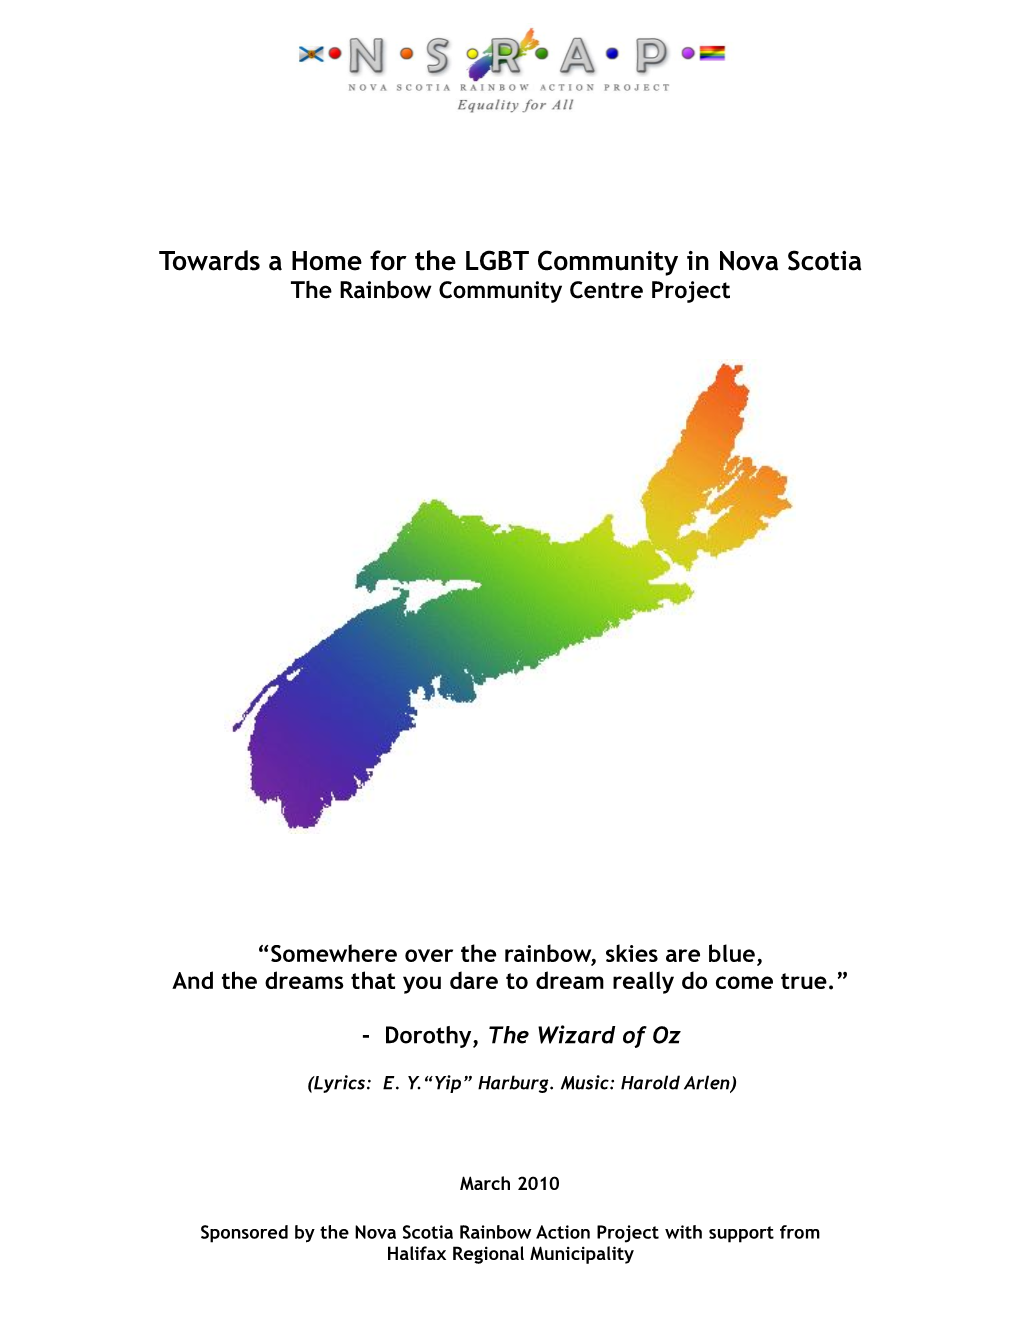 Towards a Home for the LGBT Community in Nova Scotia the Rainbow Community Centre Project